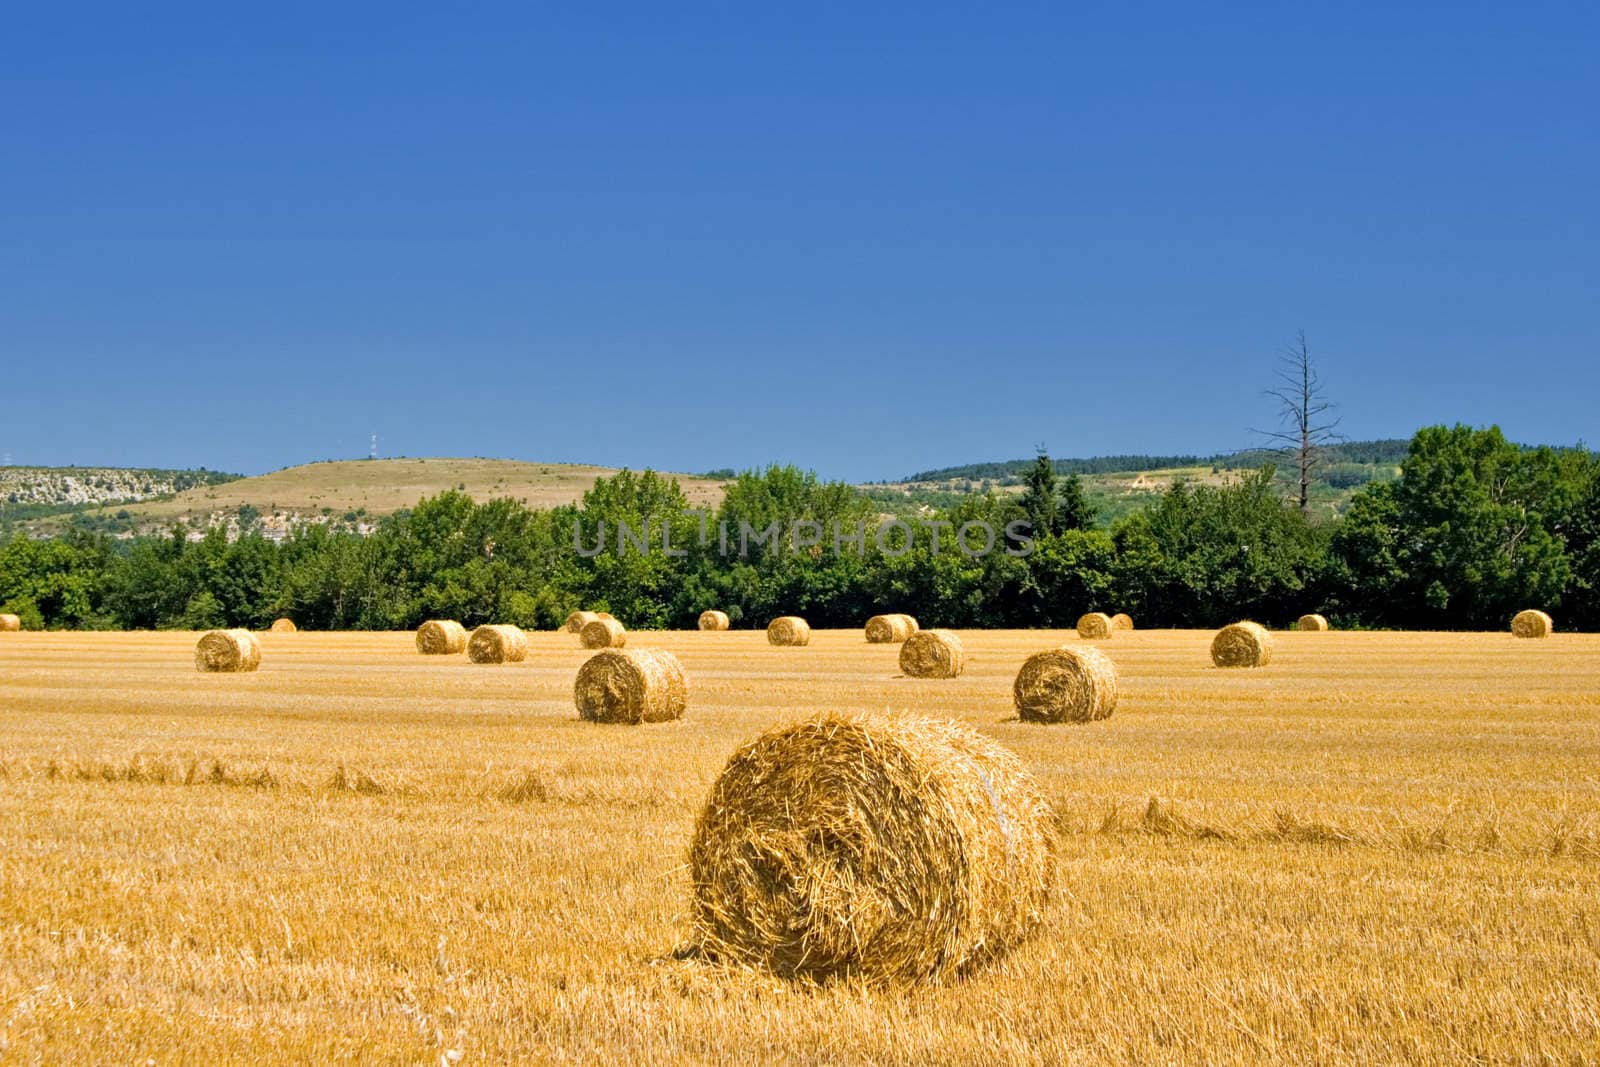 Hay roles on harvested field